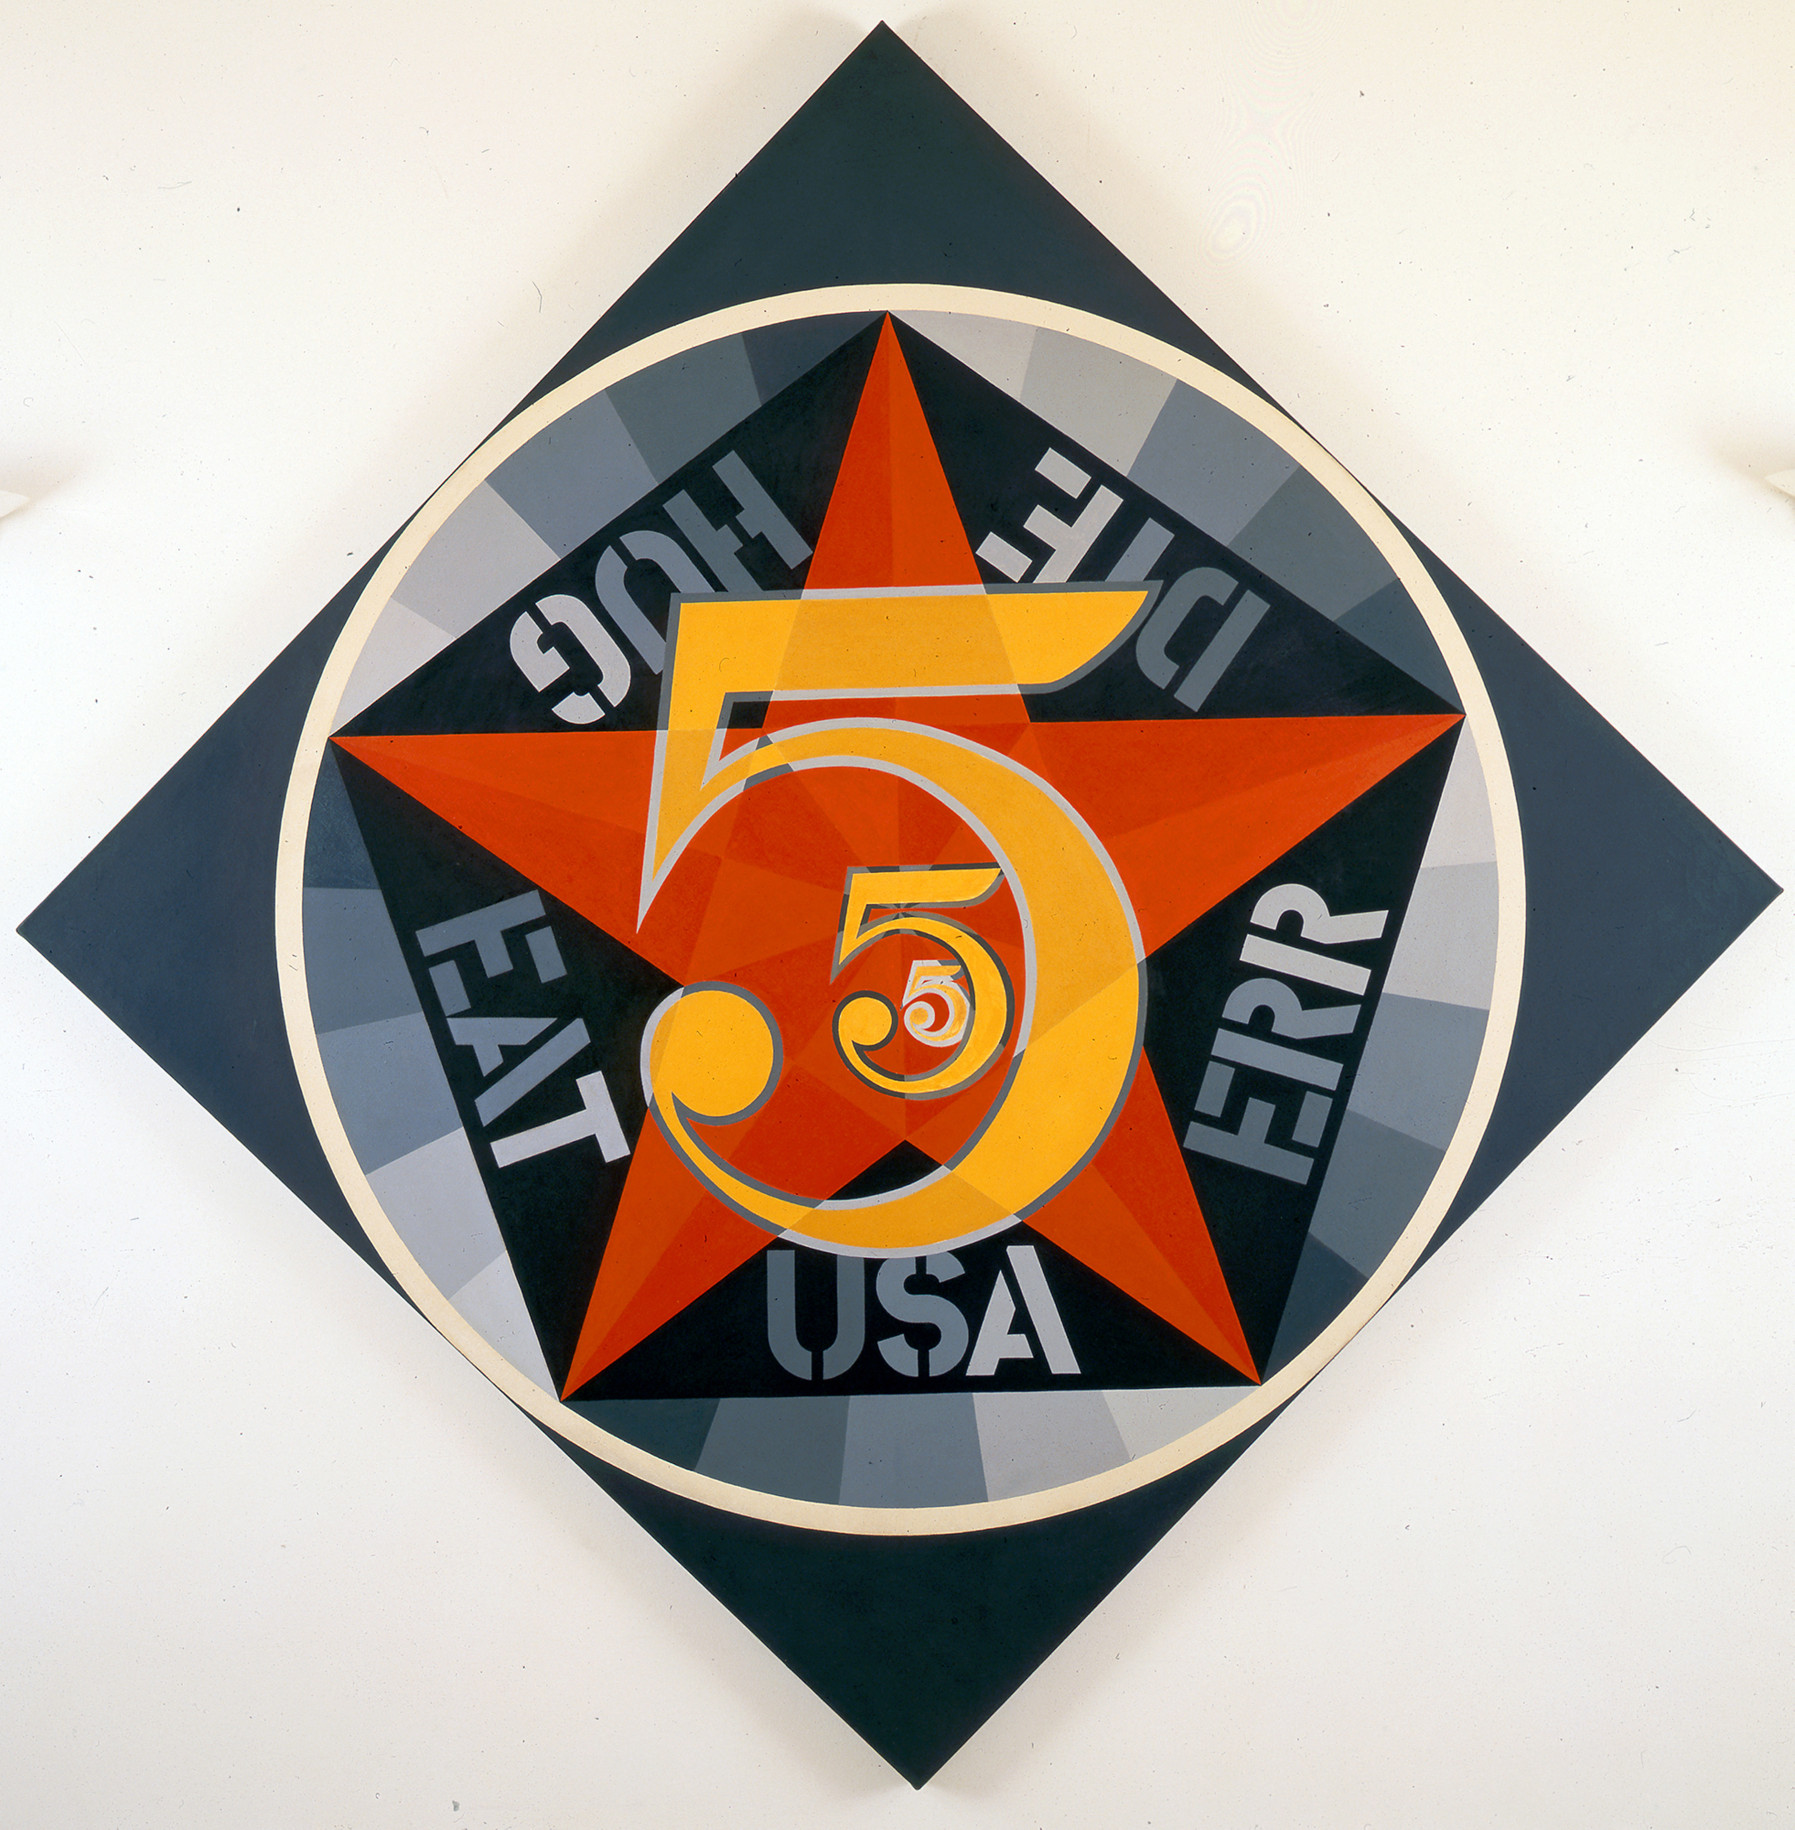 A diamond shaped painting dominated by a large circle containing three golden numeral fives agains a red star within a pentagon. Five words appear, one on each side of the pentagon. Starting with the bottom word and reading counter clockwise they are: USA, ERR, DIE, HUG, and EAT.